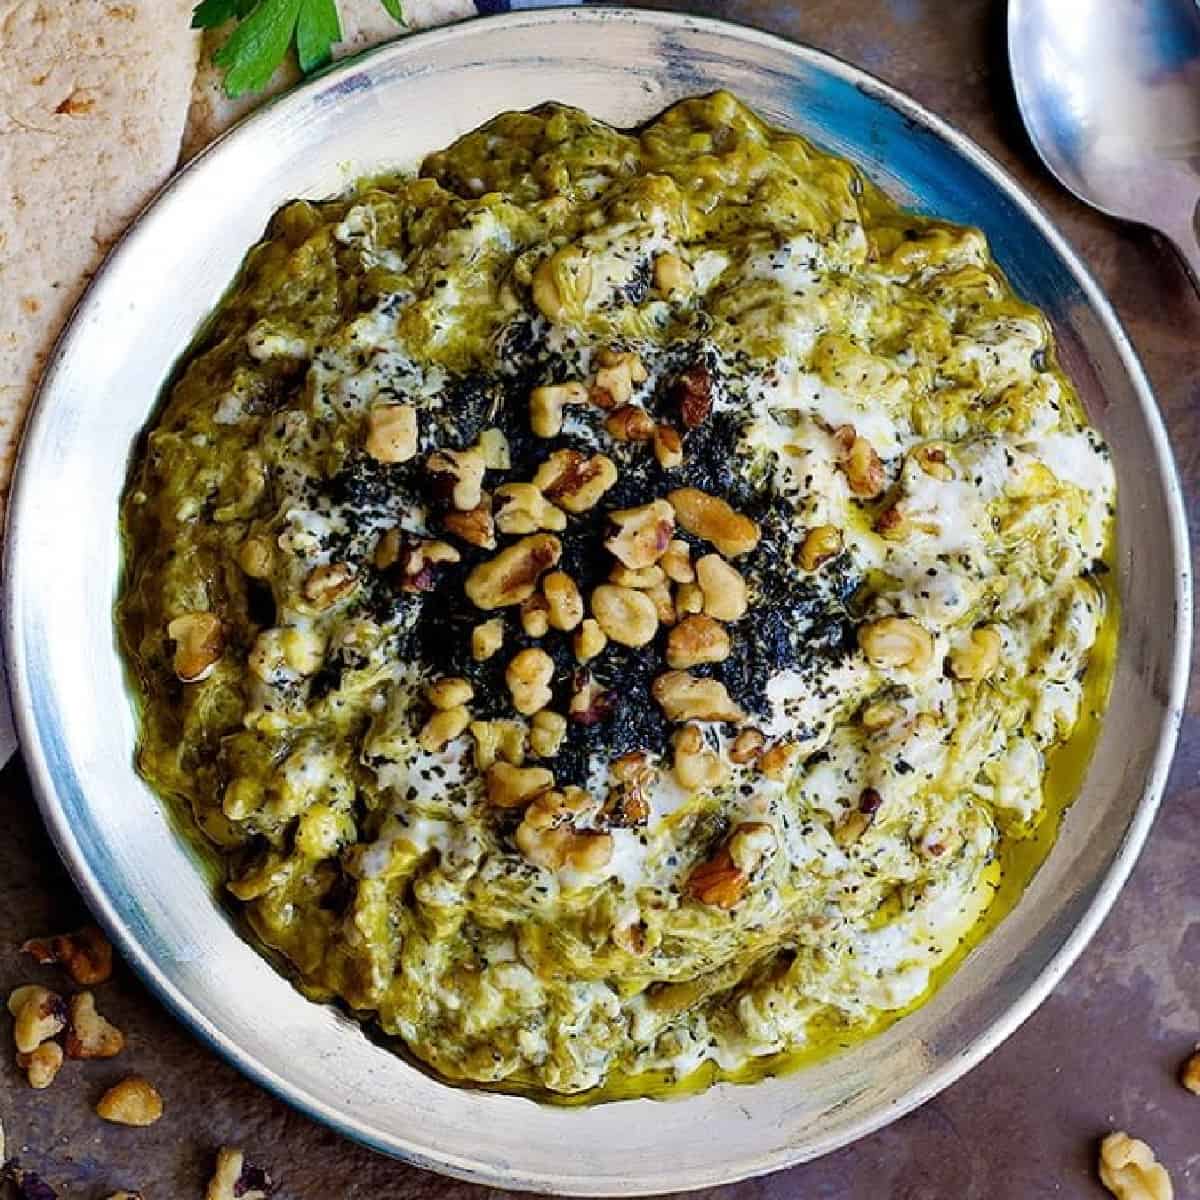 Kashke bademjan is a simple Persian eggplant dip that is made with a handful of ingredients. This tasty vegetarian dip is full of amazing flavors and makes for a perfect appetizer!
